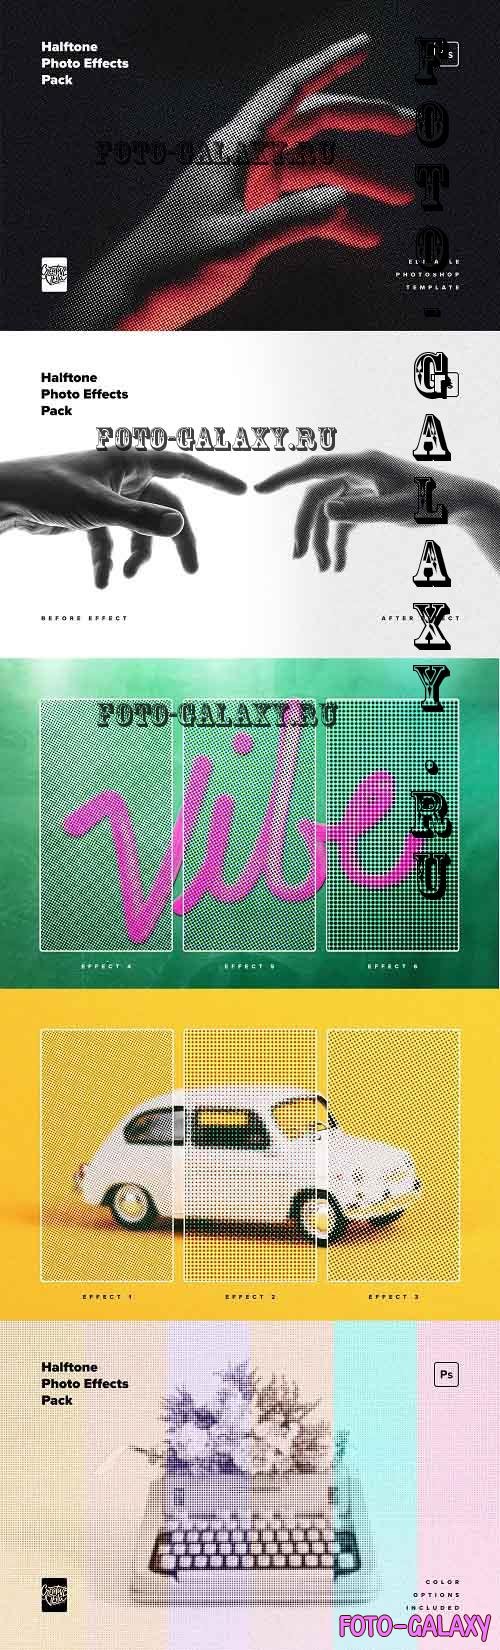 Halftone Photo Effects Pack - 7088600